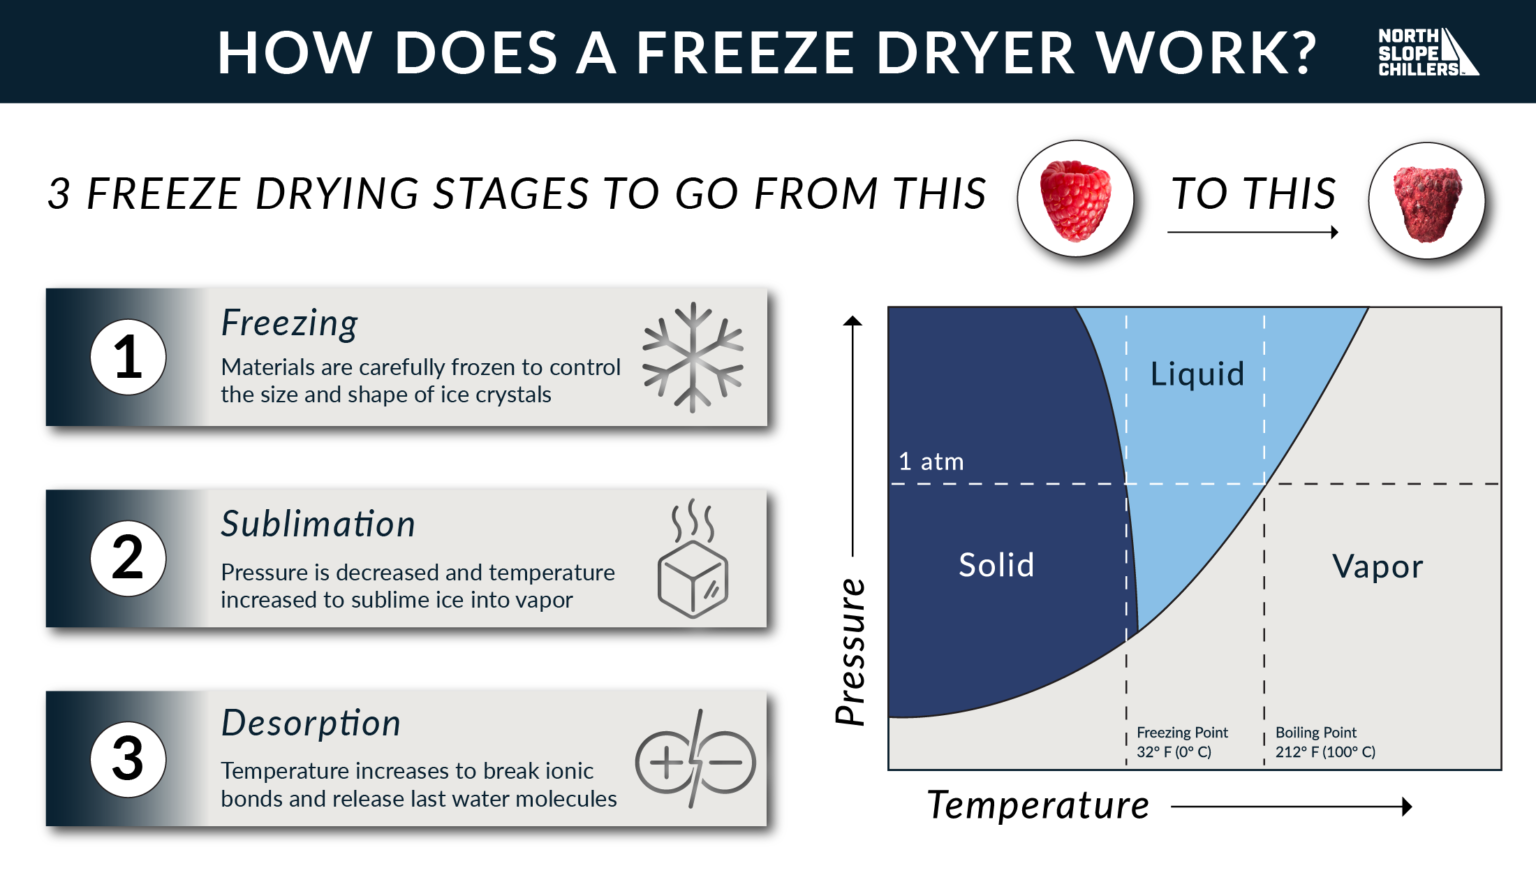 How Do Freeze Dryers Work? North Slope Chillers